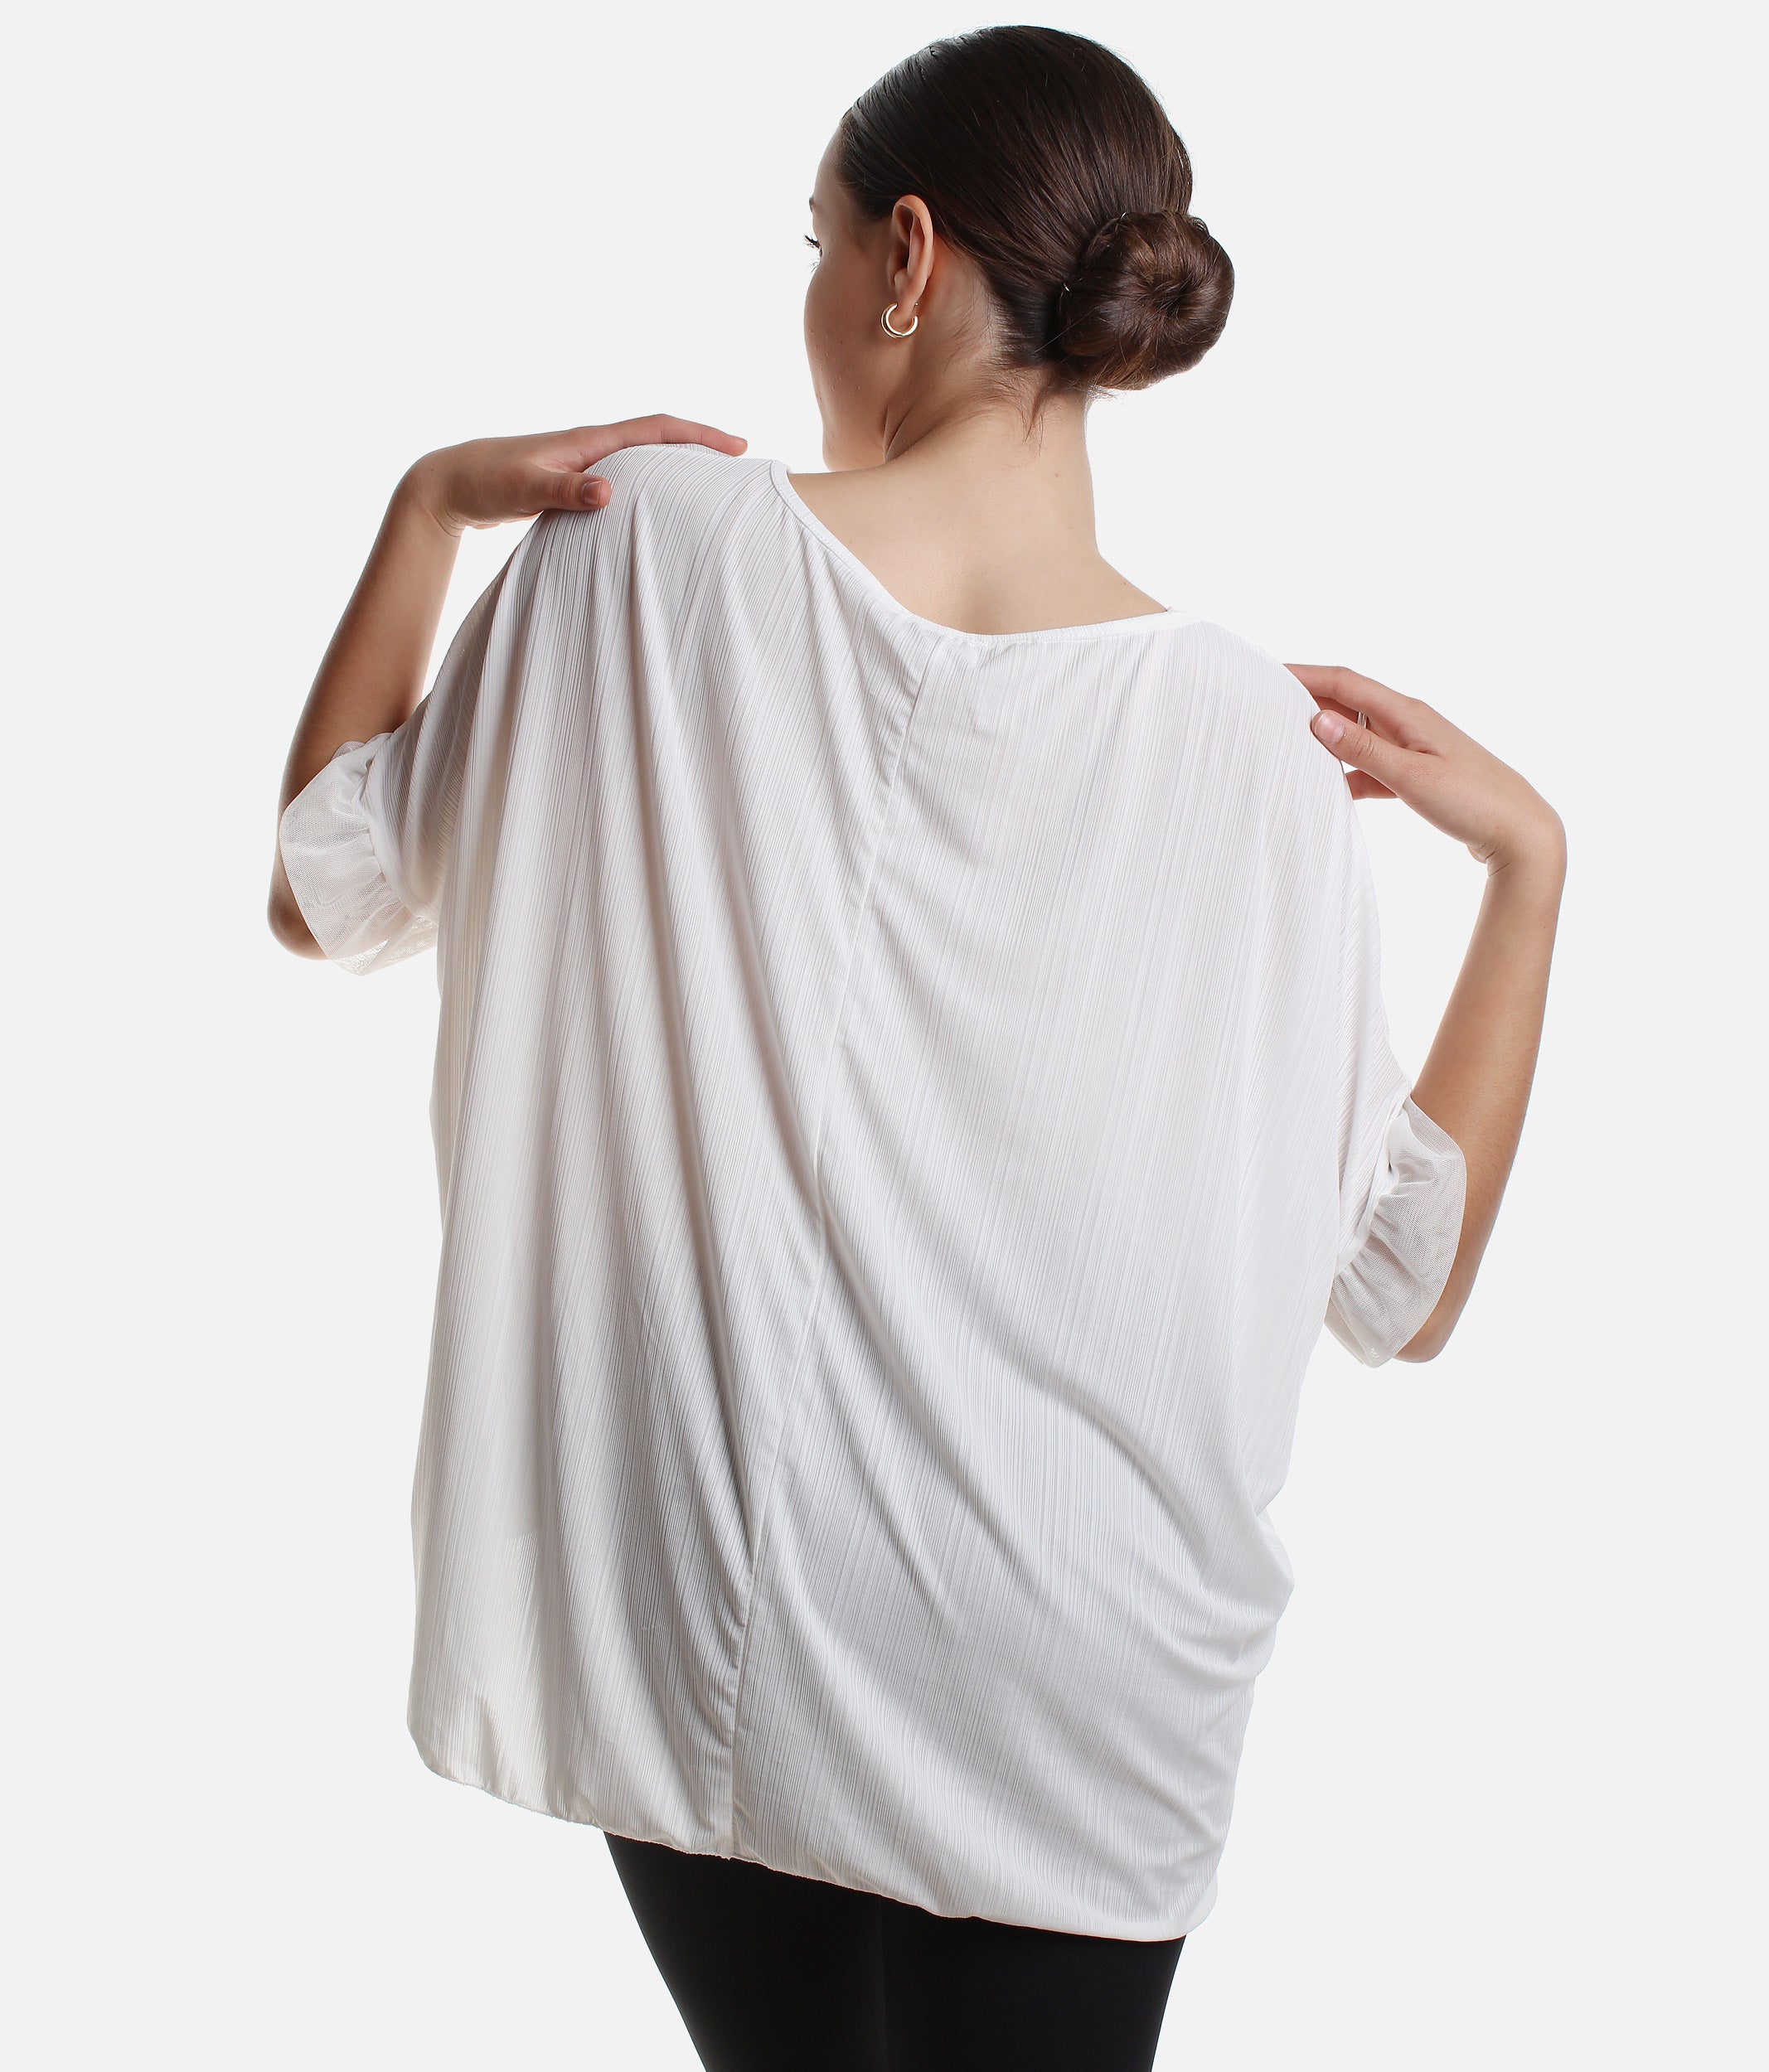 Pointe Shoes Batwing Top - 0089